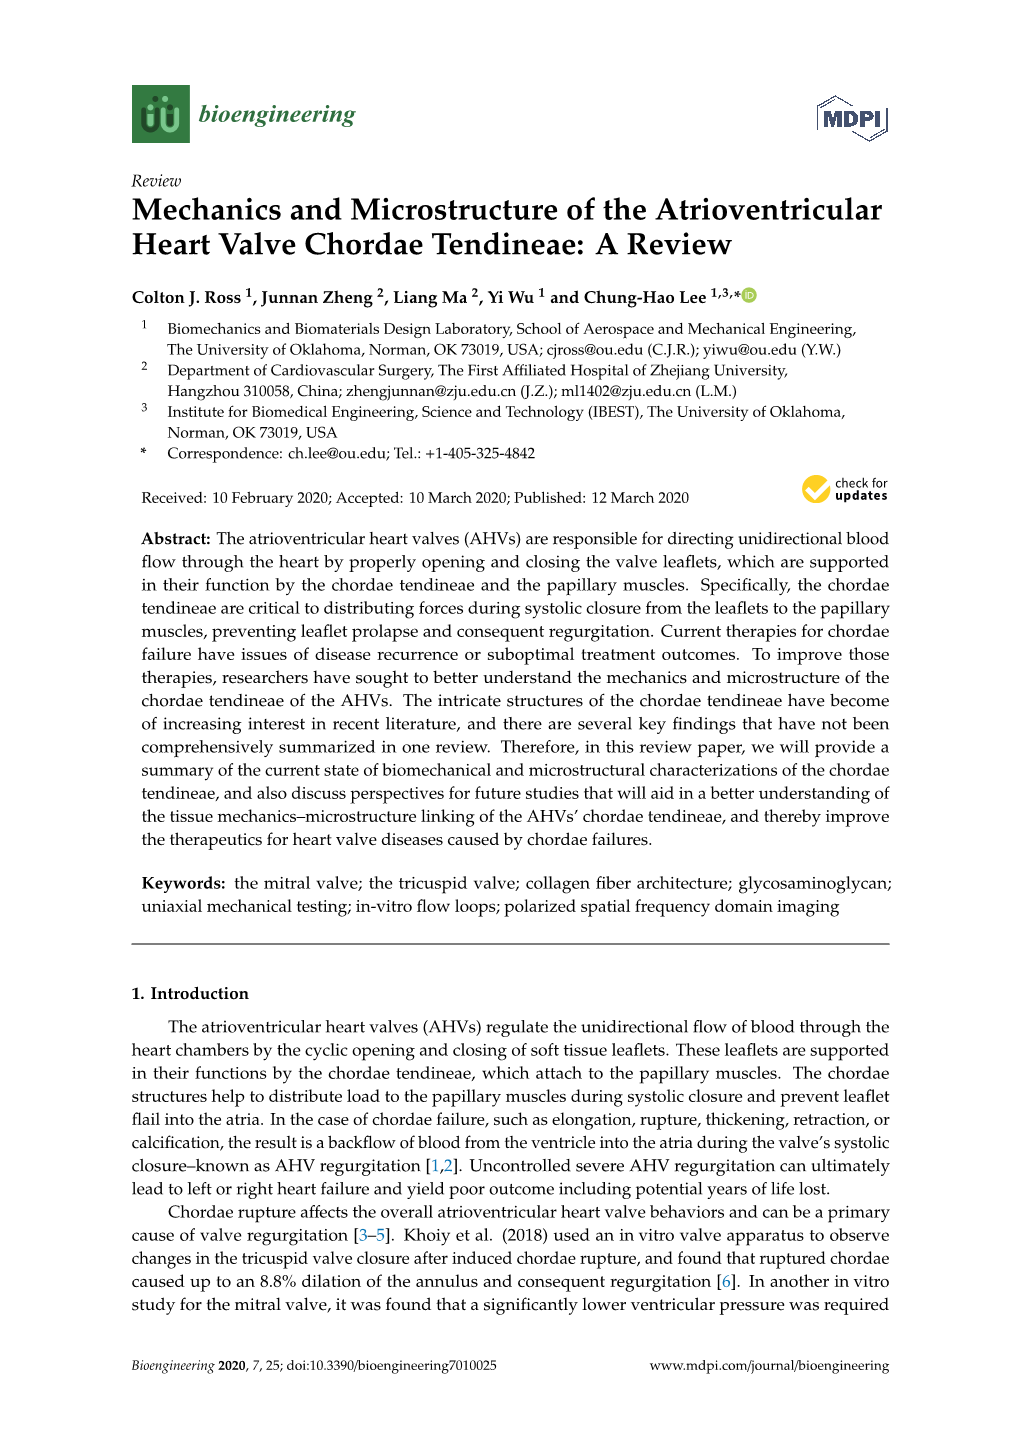 Mechanics and Microstructure of the Atrioventricular Heart Valve Chordae Tendineae: a Review